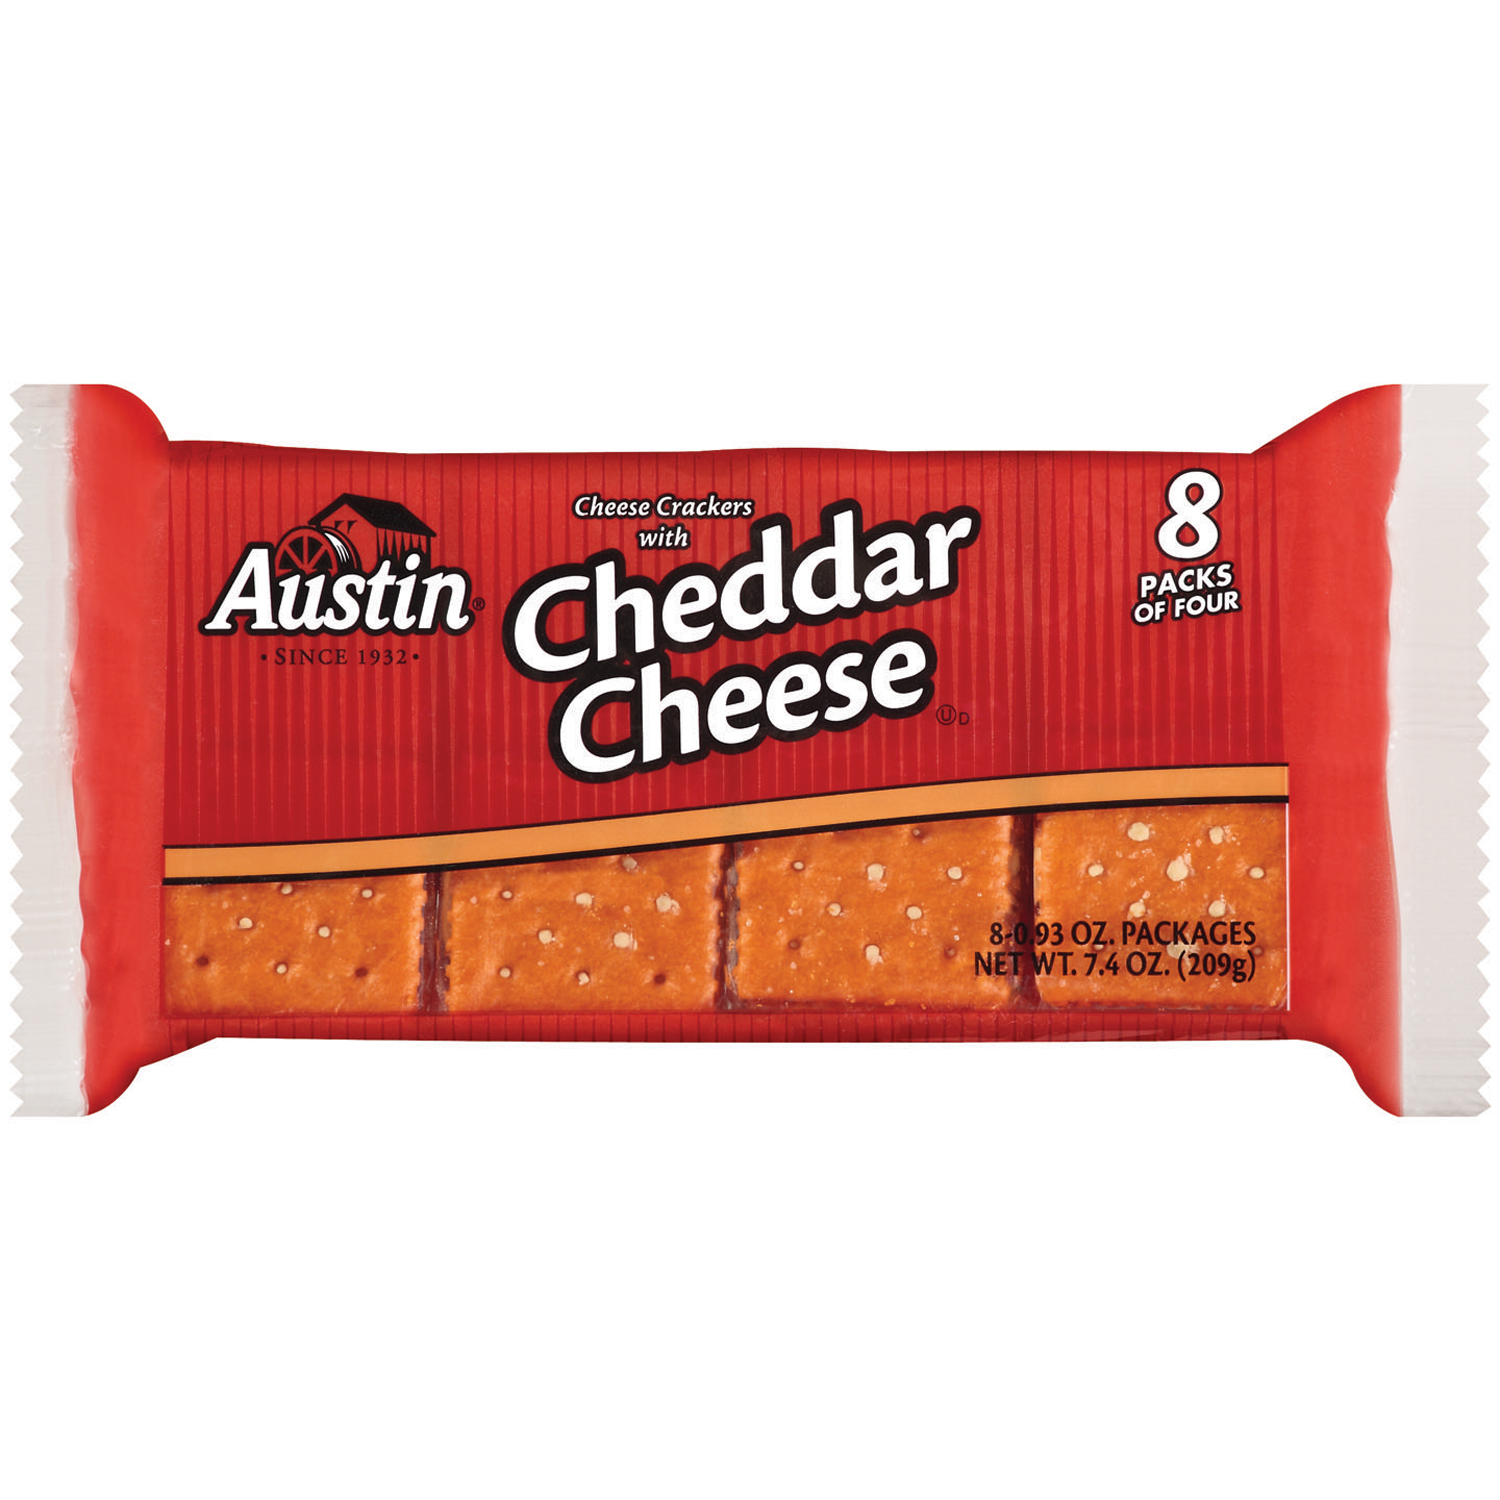 Austin Cheese Crackers, with Cheddar Cheese 8 - 0.93 oz packages [7.4 oz (209 g)]